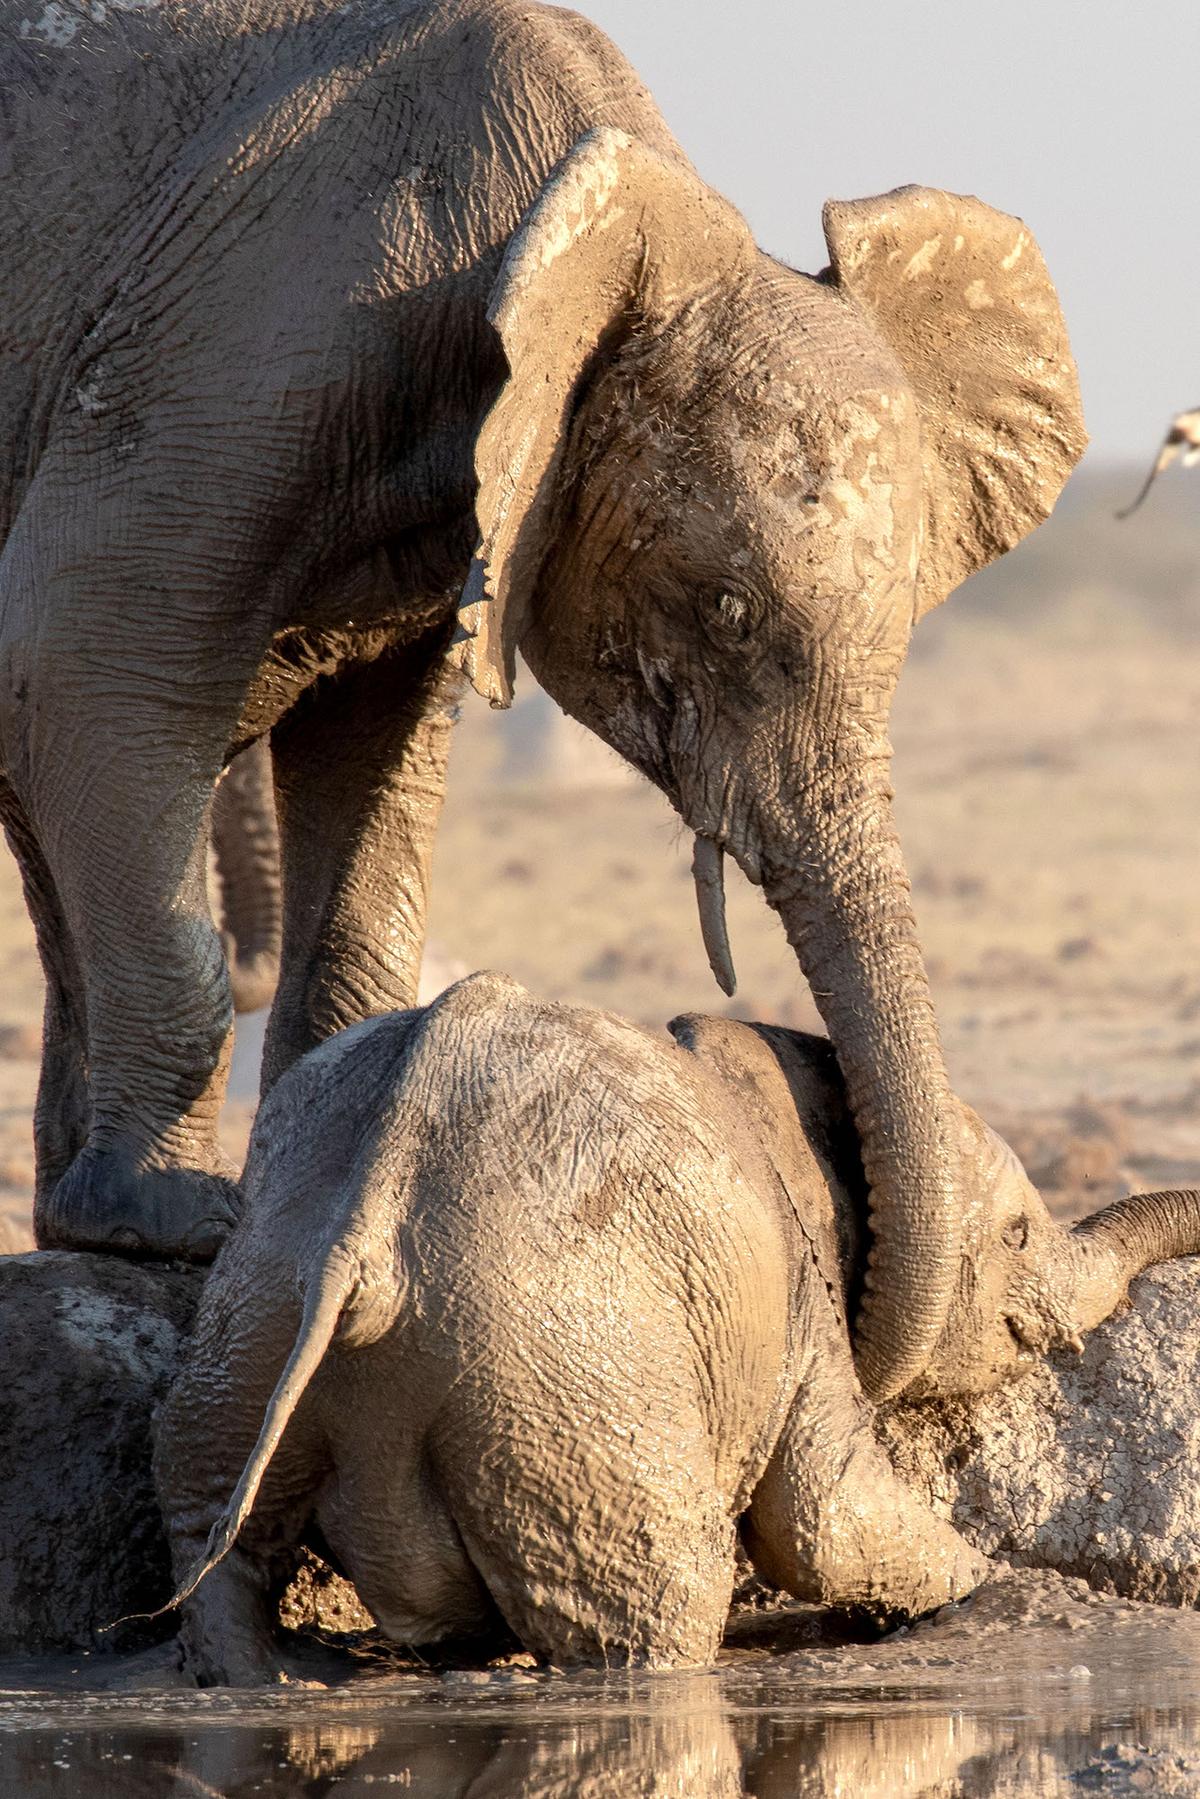 The mama elephant trying to rescue her calf from the watering hole. (Caters News)